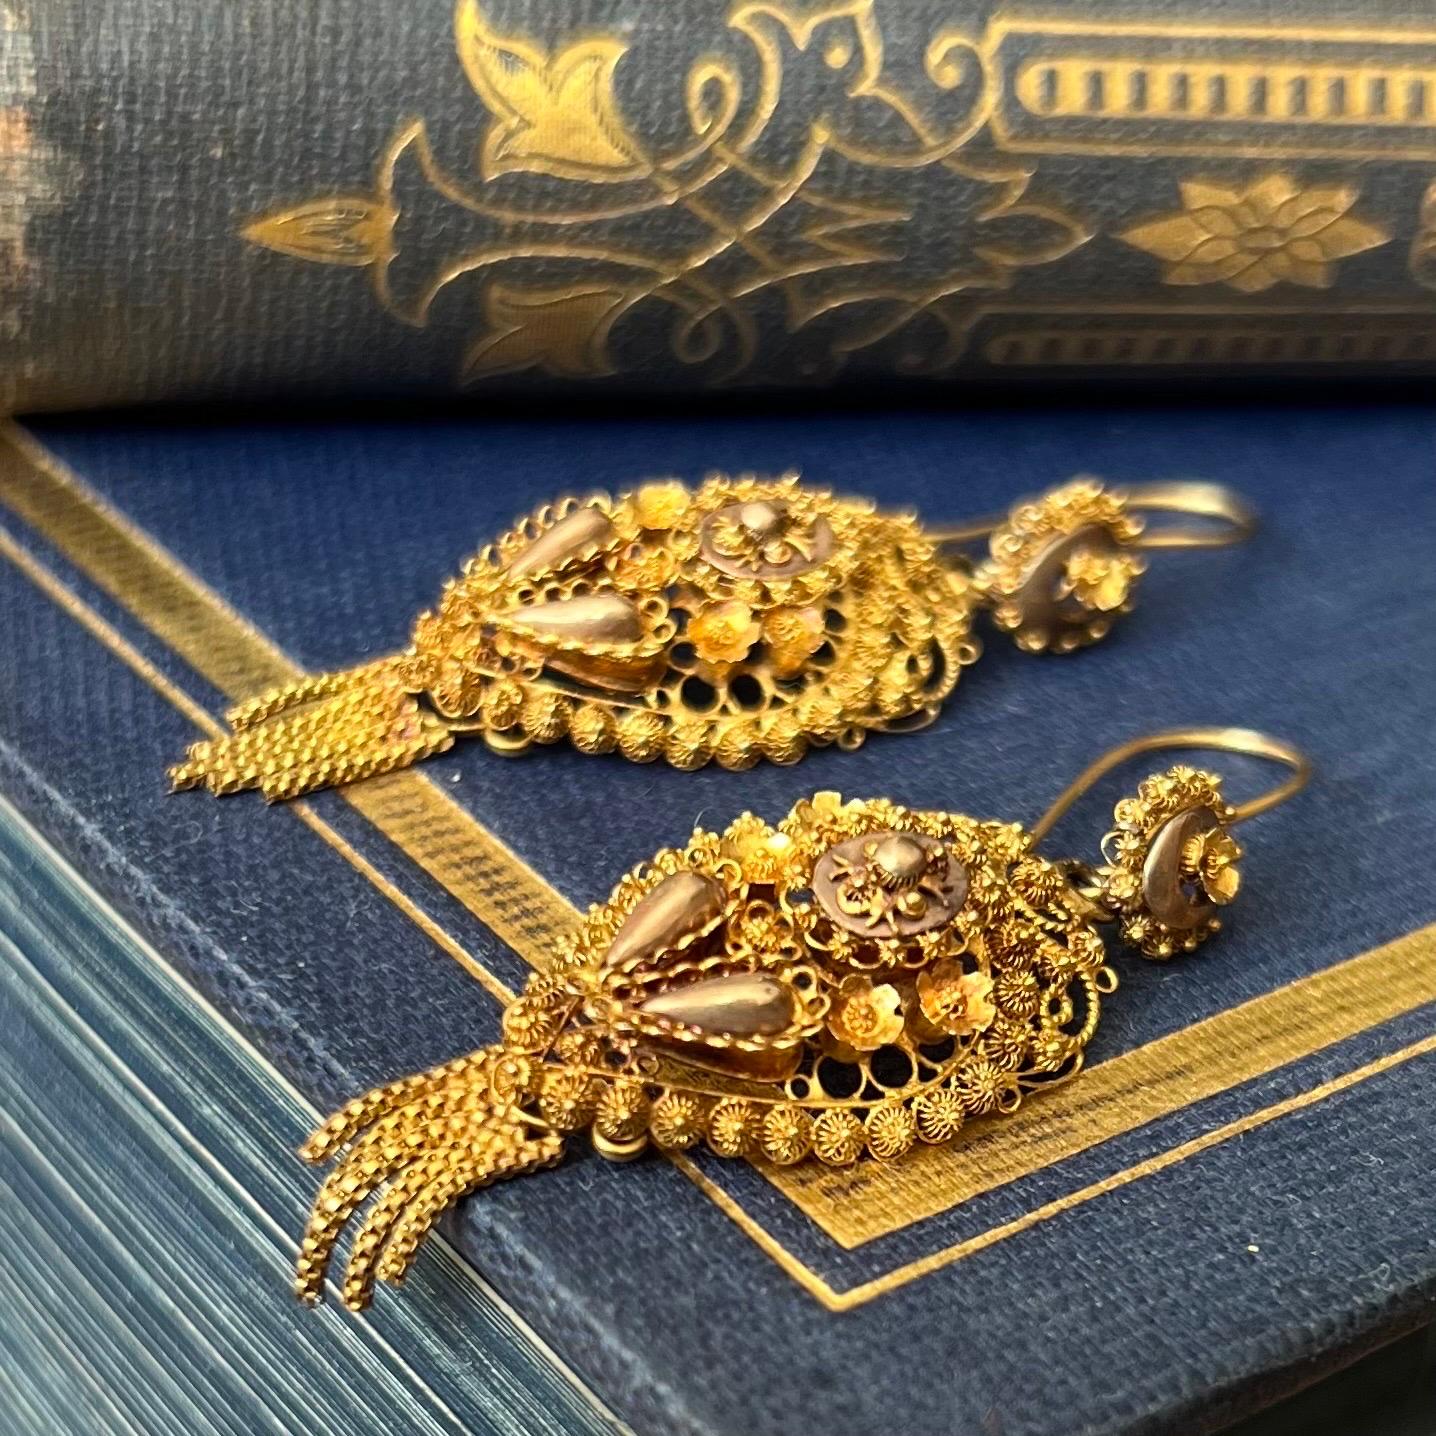 These antique 19th century filigree dangle earrings are made of 14 karat yellow gold. The earrings are beautifully crafted of twisted gold wirework and skillfully handcrafted into this lacy structure. The gold has and open foliage design made of